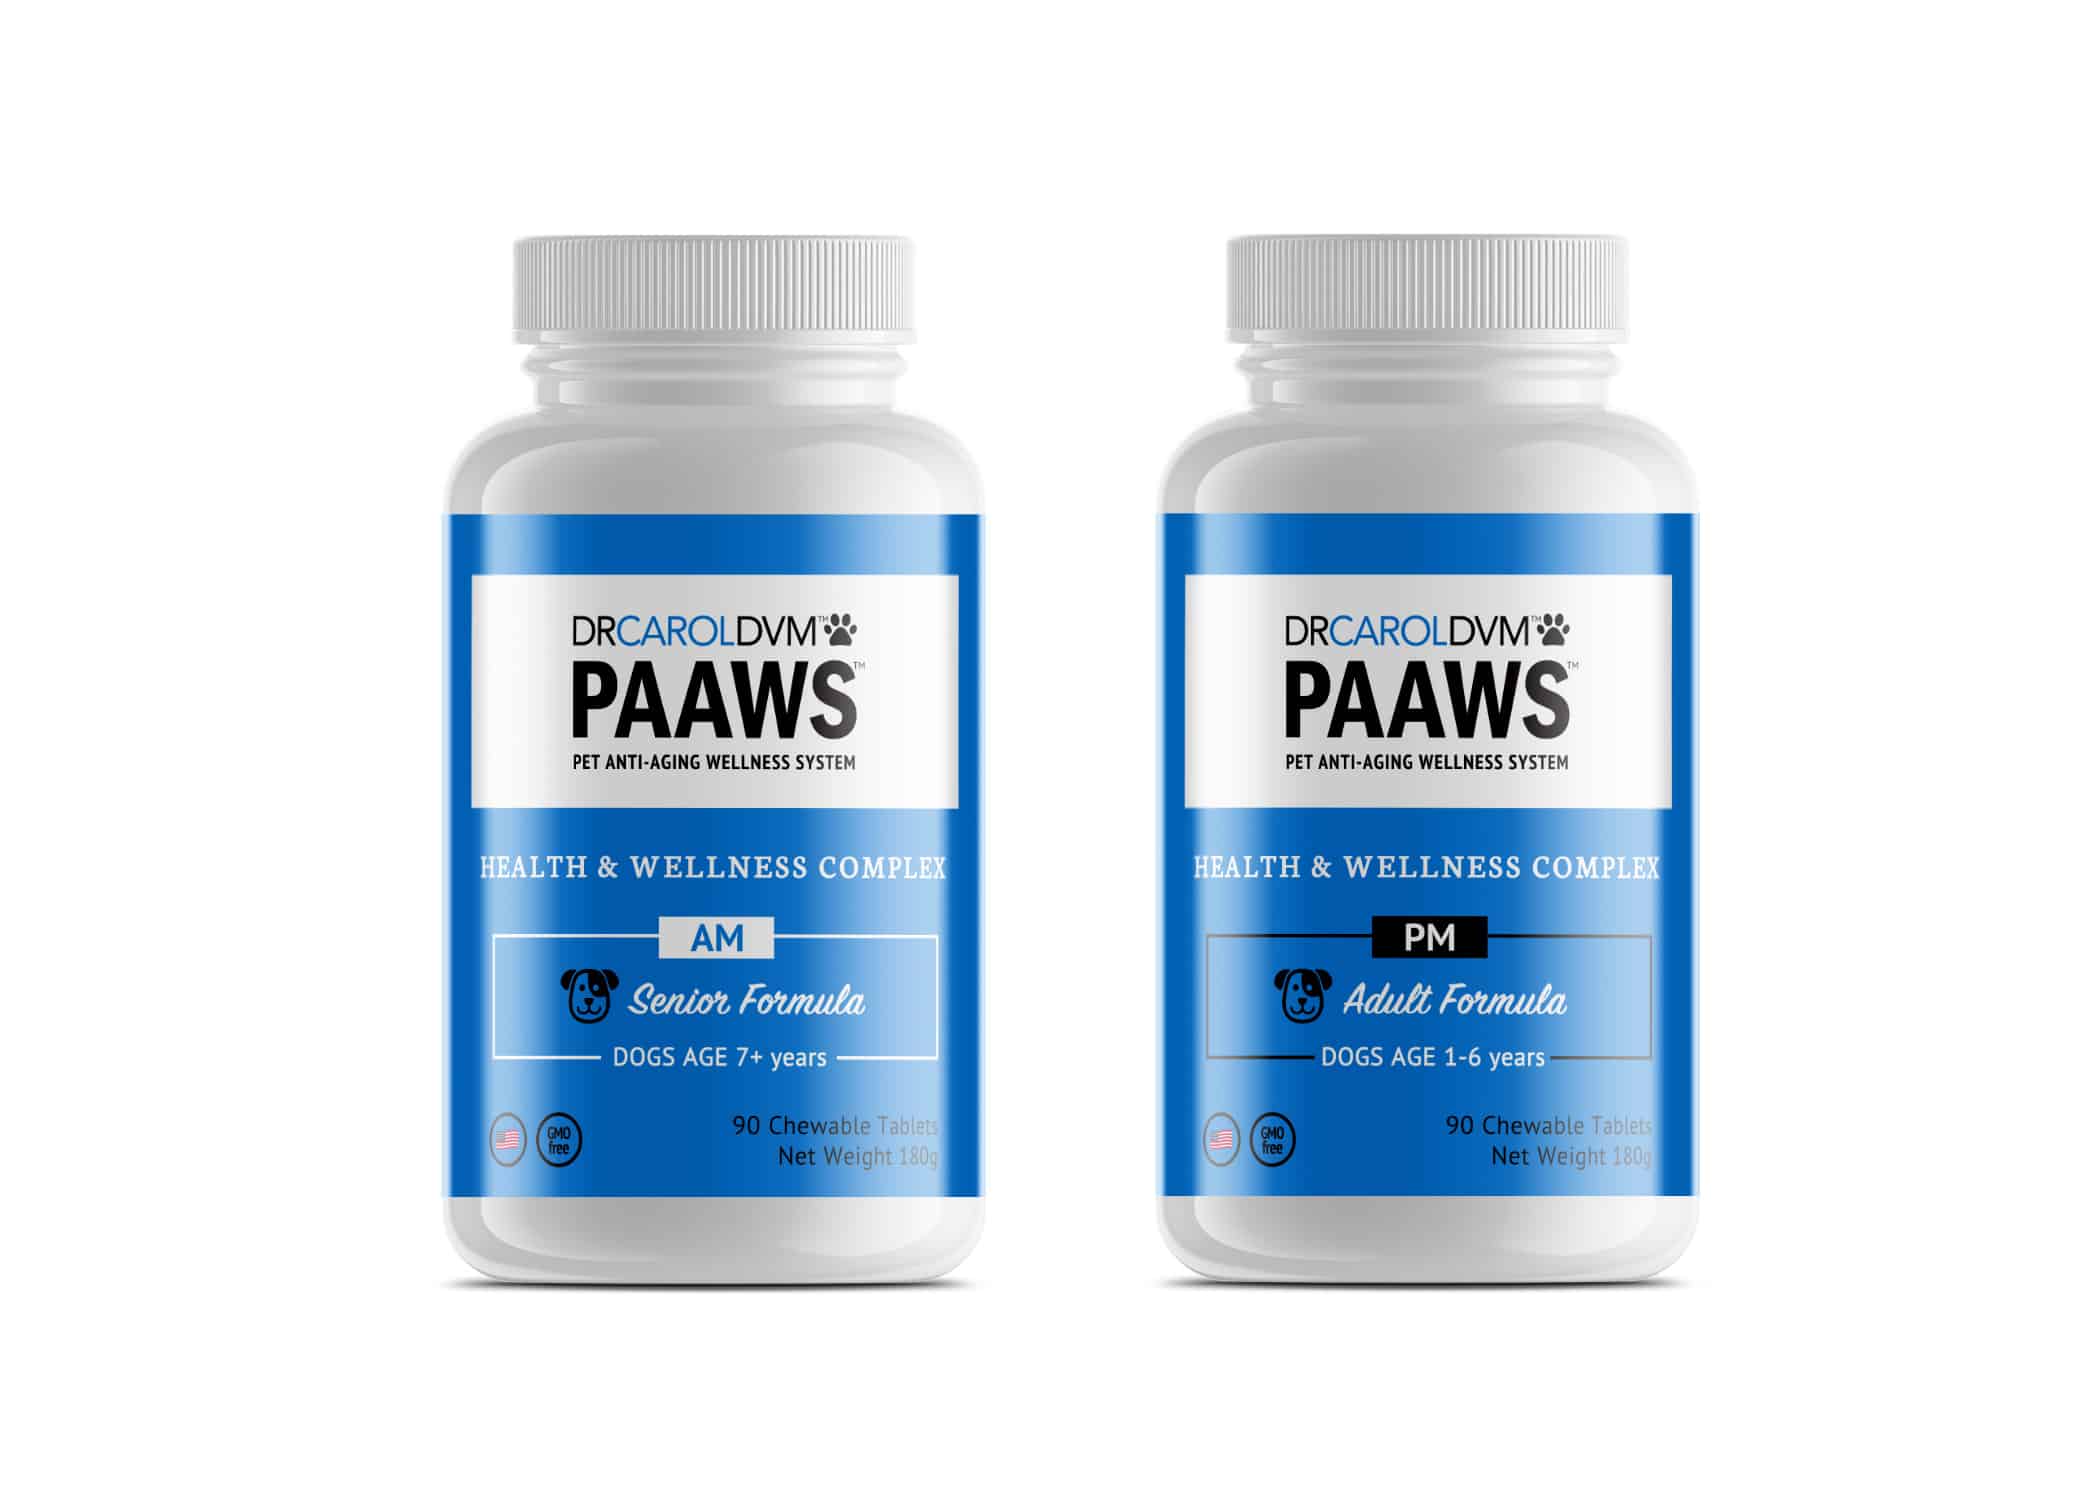 Dr. Carol DVM PAAWS pet supplements design in blue, black and white elements against white background.